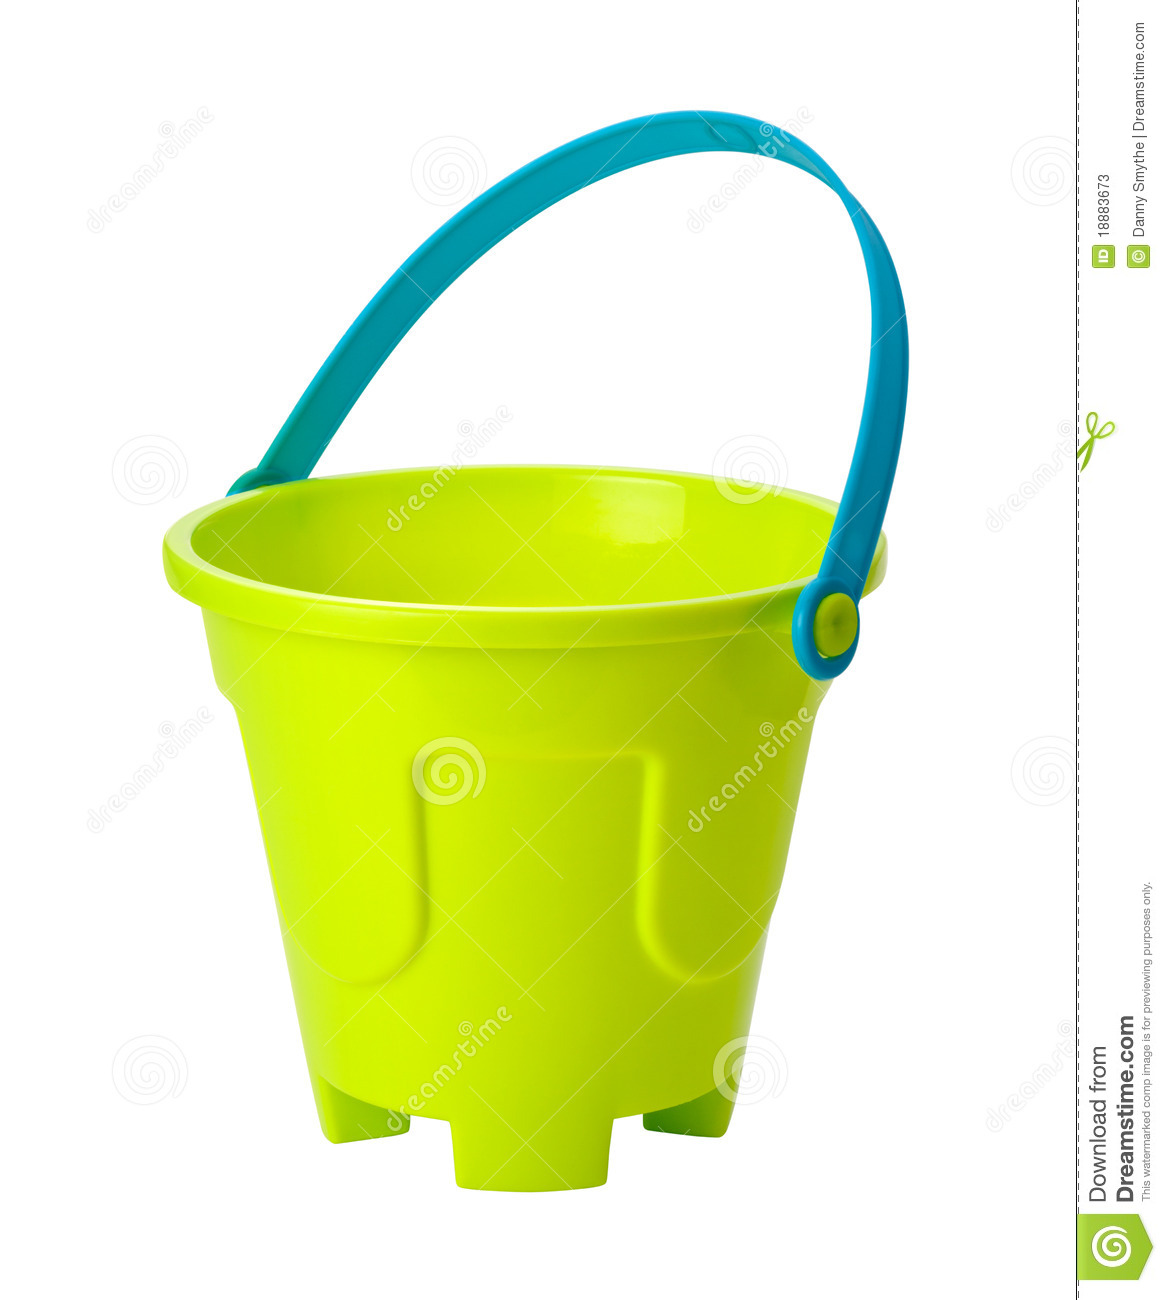 Beach Toy Sand Pail Isolated With Clipping Path Isolation Is On A